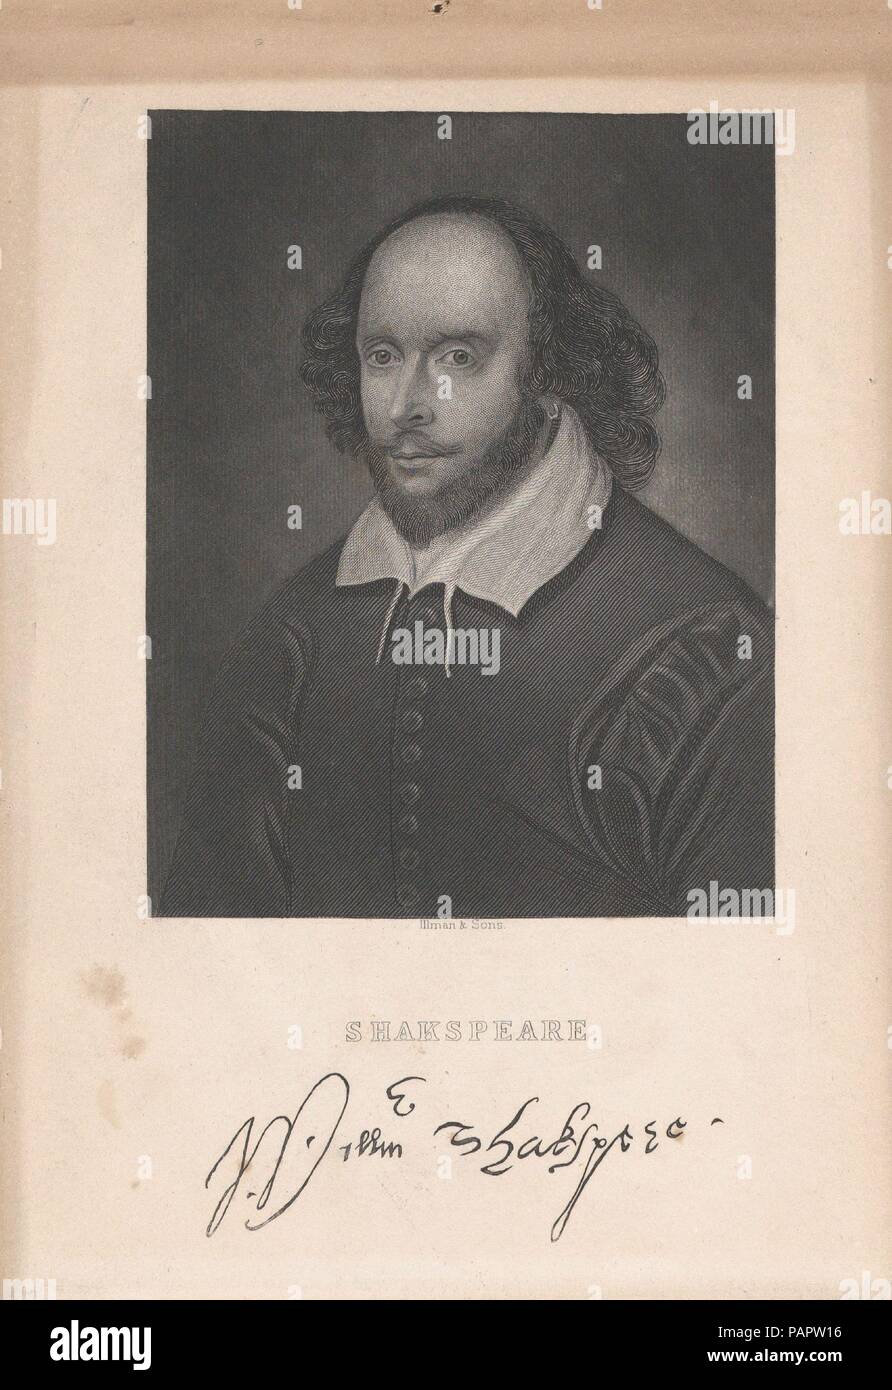 William Shakespeare. Dimensions: Sheet: 7 13/16 × 5 7/16 in. (19.8 × 13.8 cm). Publisher: Illman and Sons (American, Philadelphia, active 19th century). Subject: William Shakespeare (British, Stratford-upon-Avon 1564-1616 Stratford-upon-Avon). Date: mid-19th century.  This engraved book illustration is based on the Chandos portrait of Shakespeare, a painting with a good claim to have been made during he subject's lifetime. Once owned by the Duke of Chandos, the painting later became the first to enter London's National Portrait Gallery in 1856. The subject wears a beard and mustache, plain dou Stock Photo